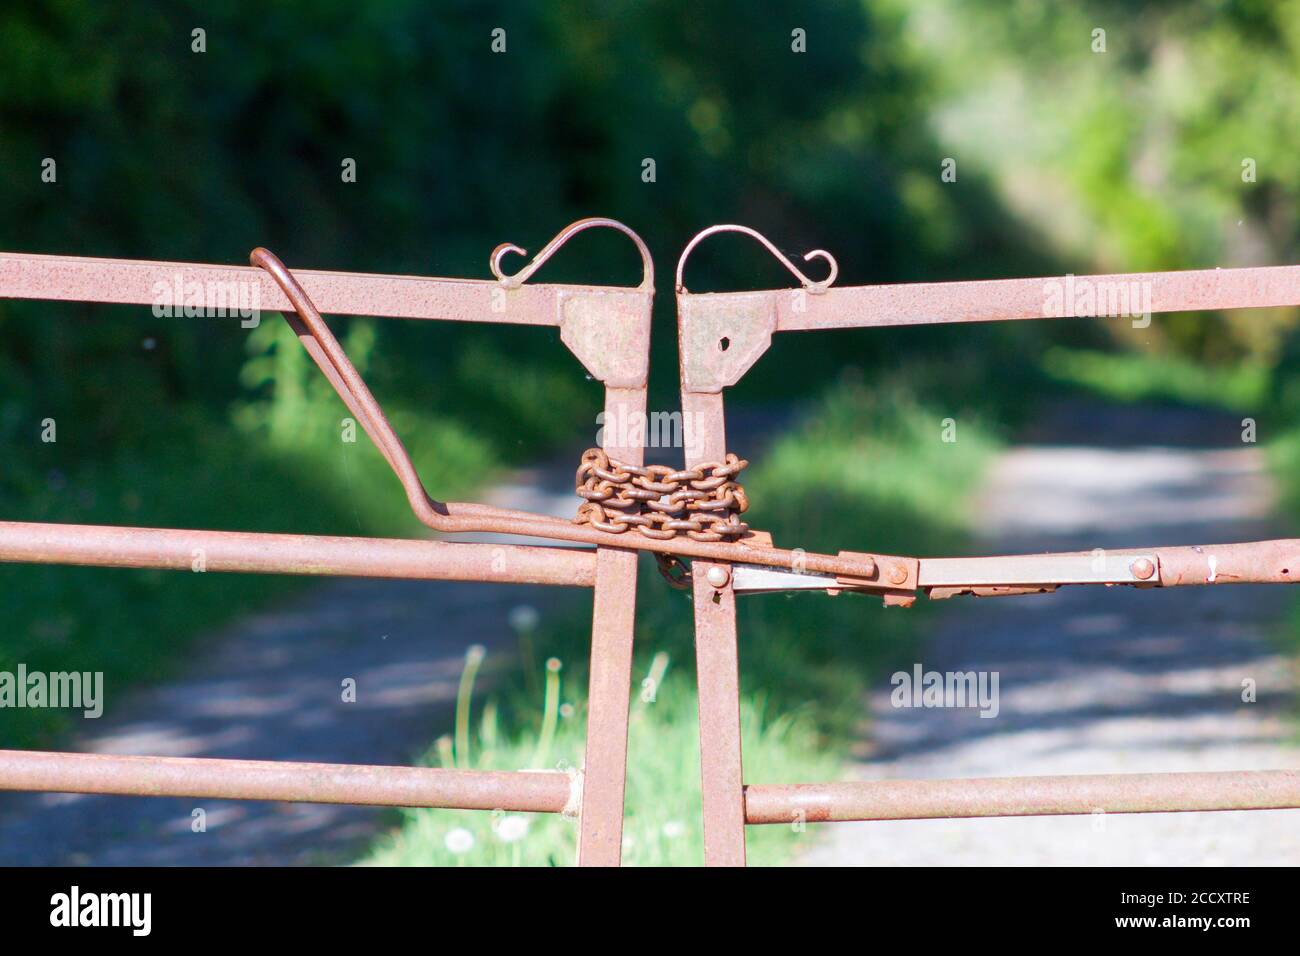 Locked gates to agricultural land Stock Photo